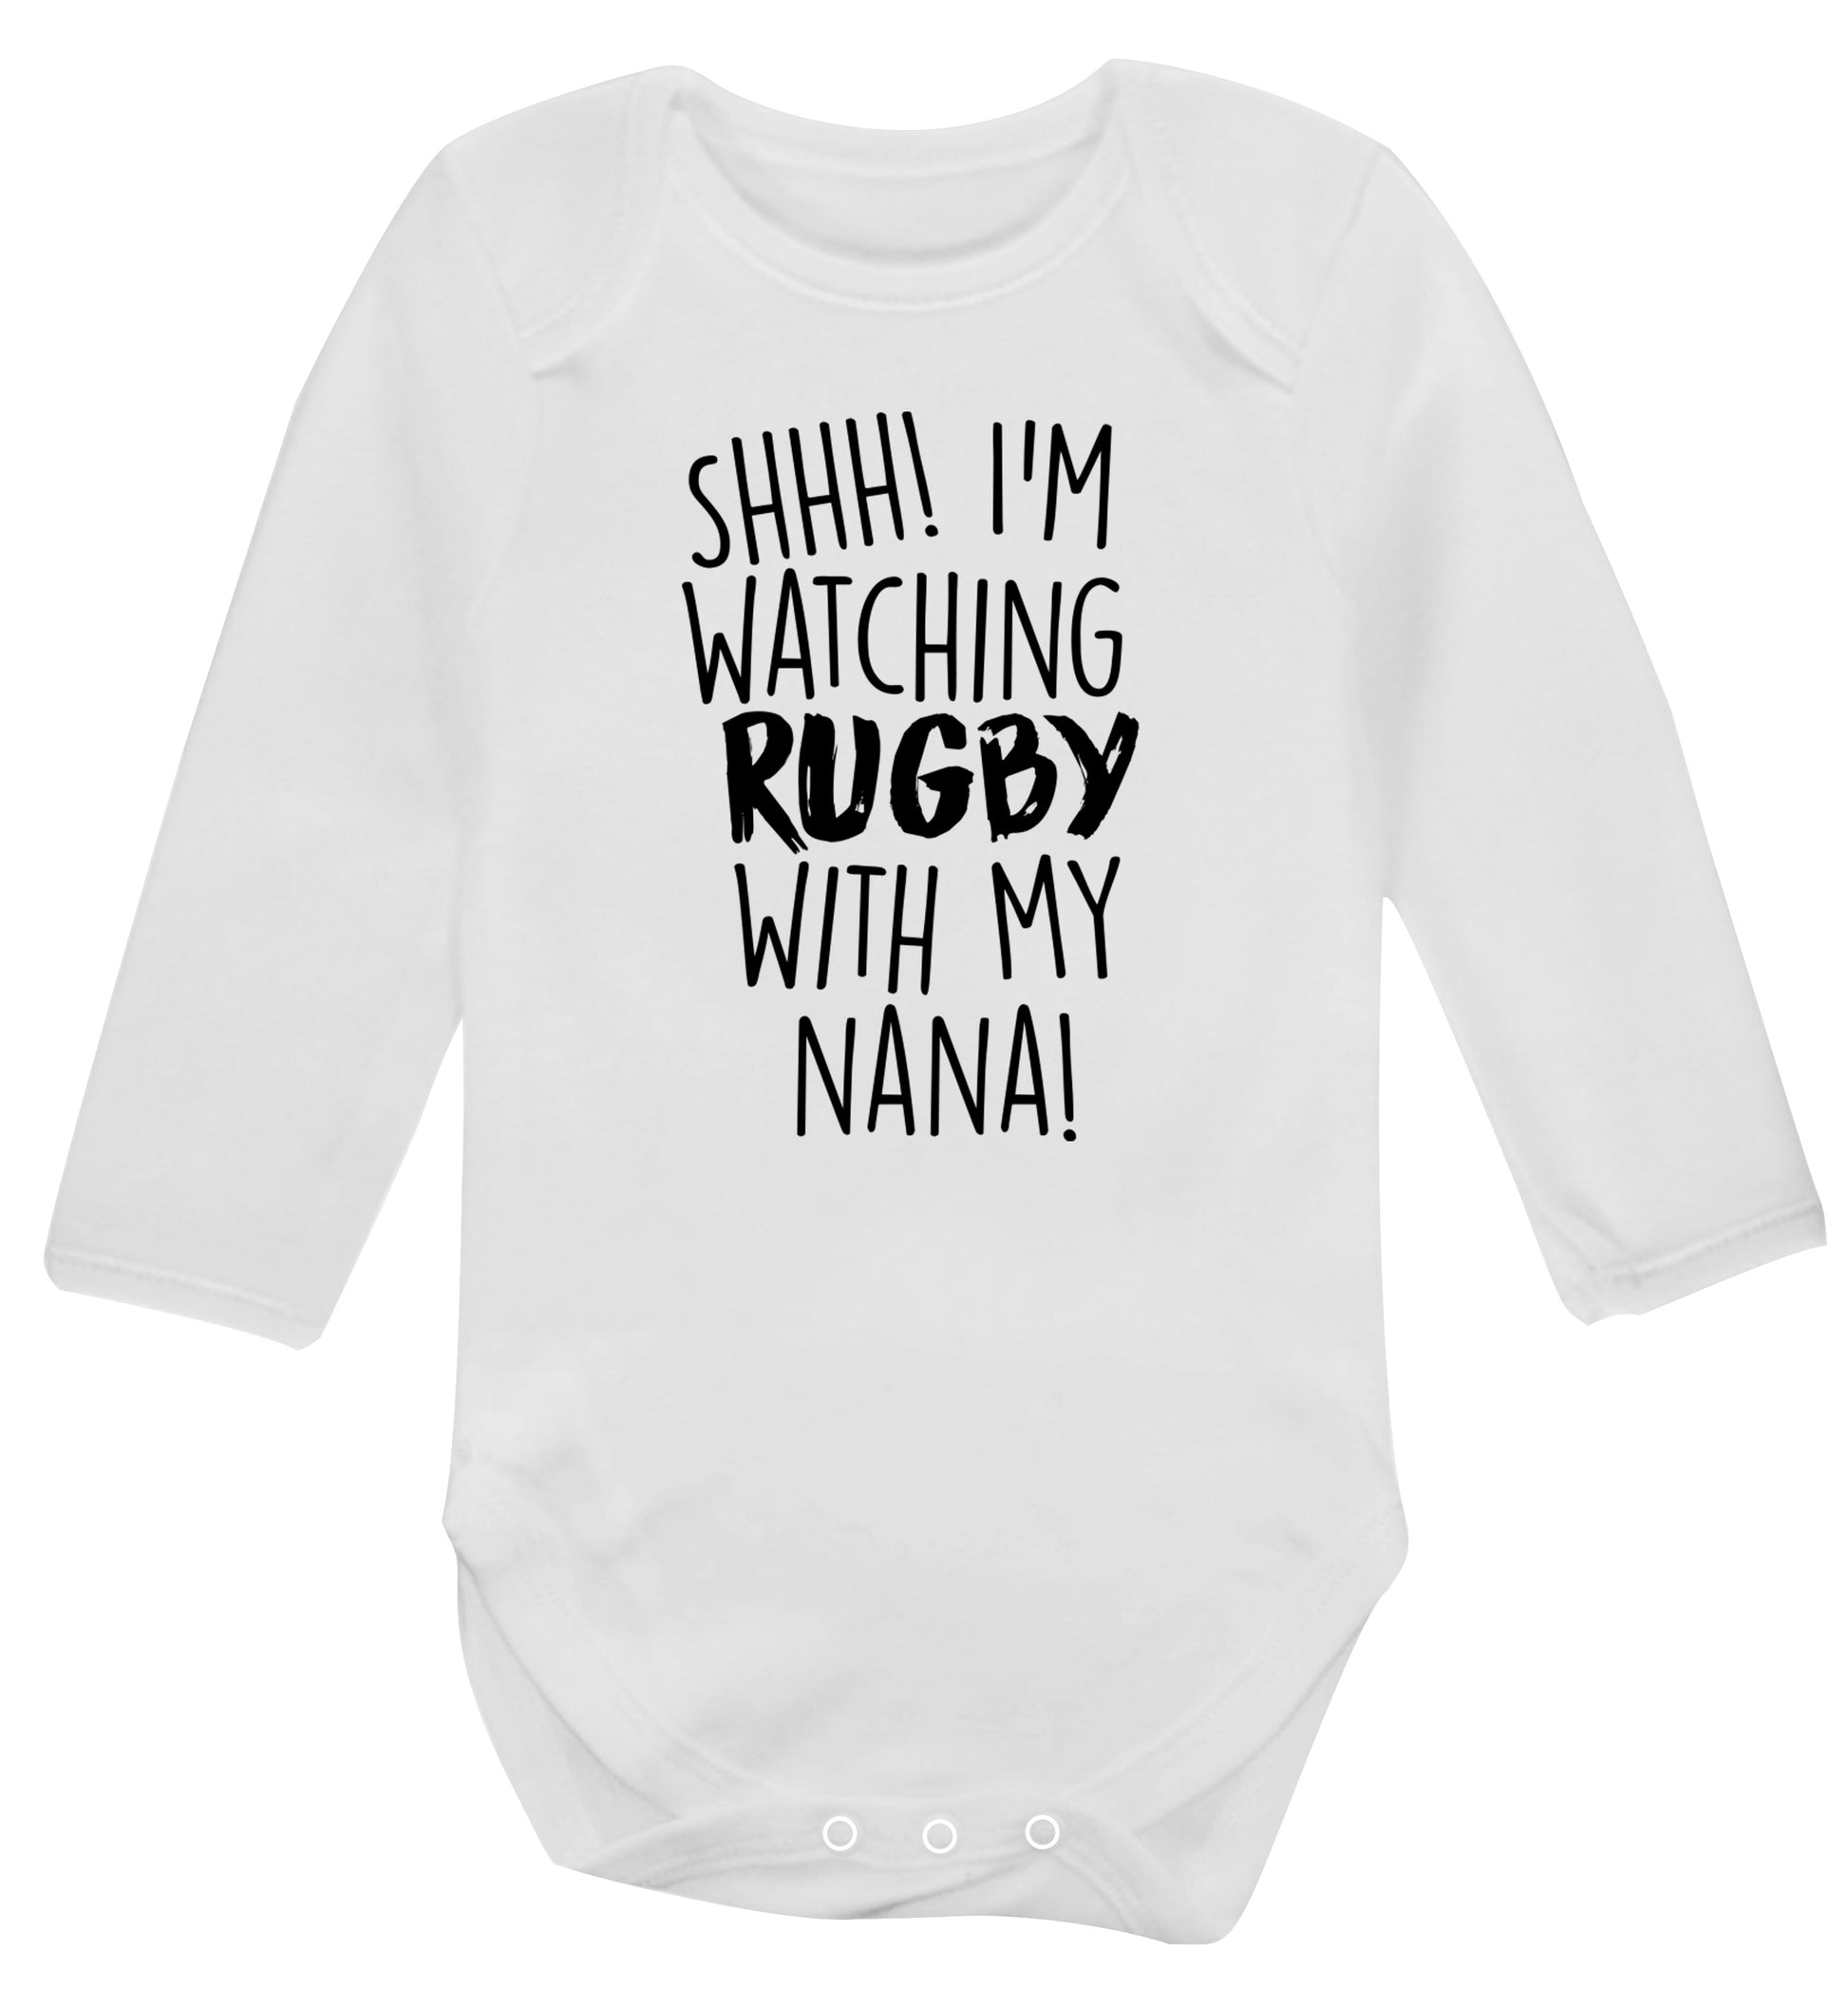 Shh I'm watching rugby with my nana Baby Vest long sleeved white 6-12 months